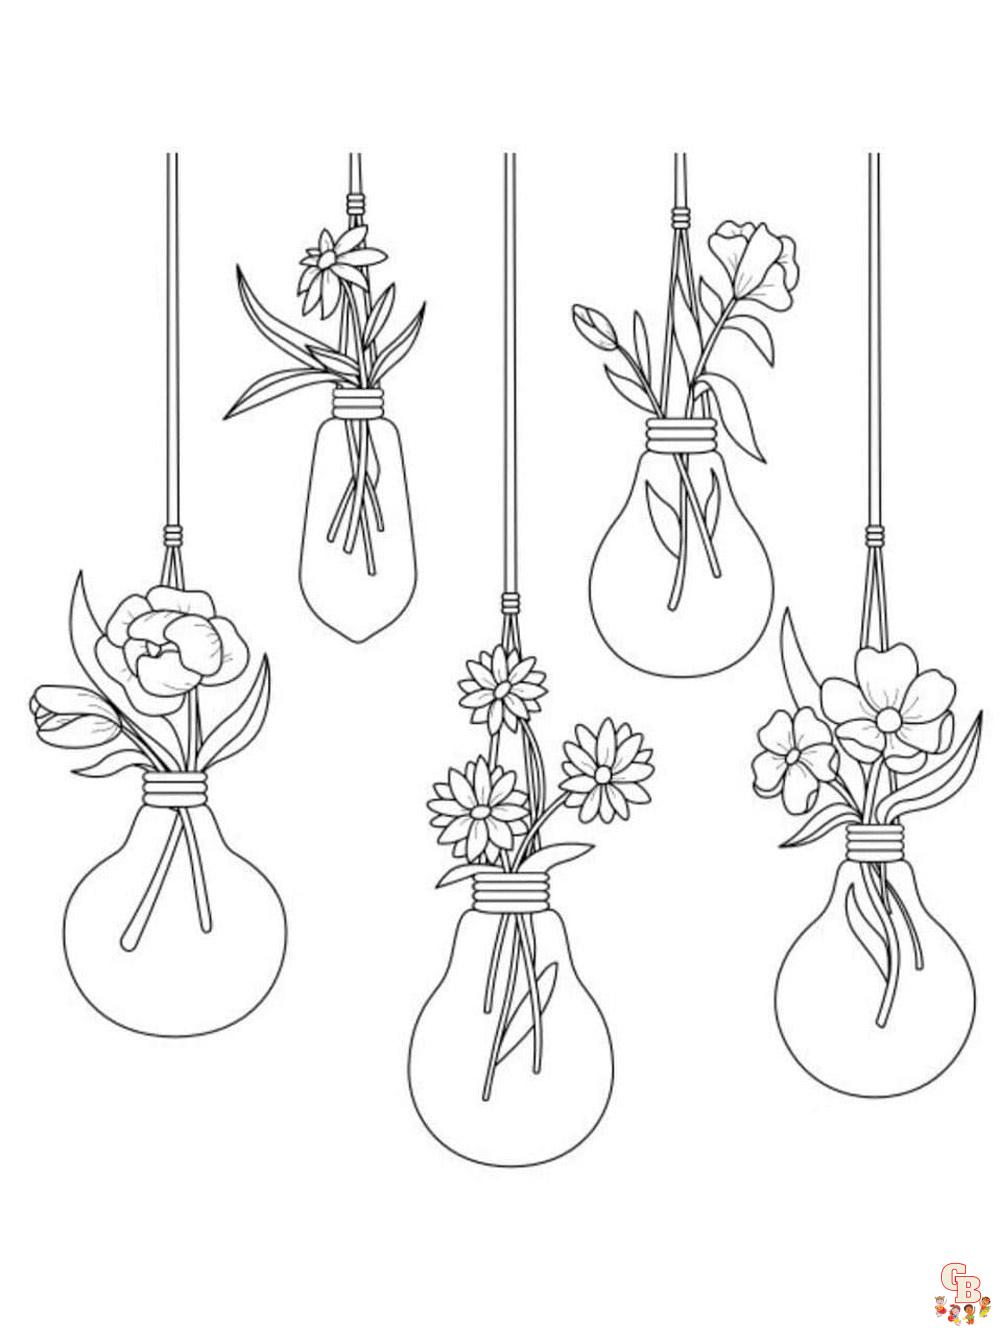 Aesthetic Coloring Pages 11